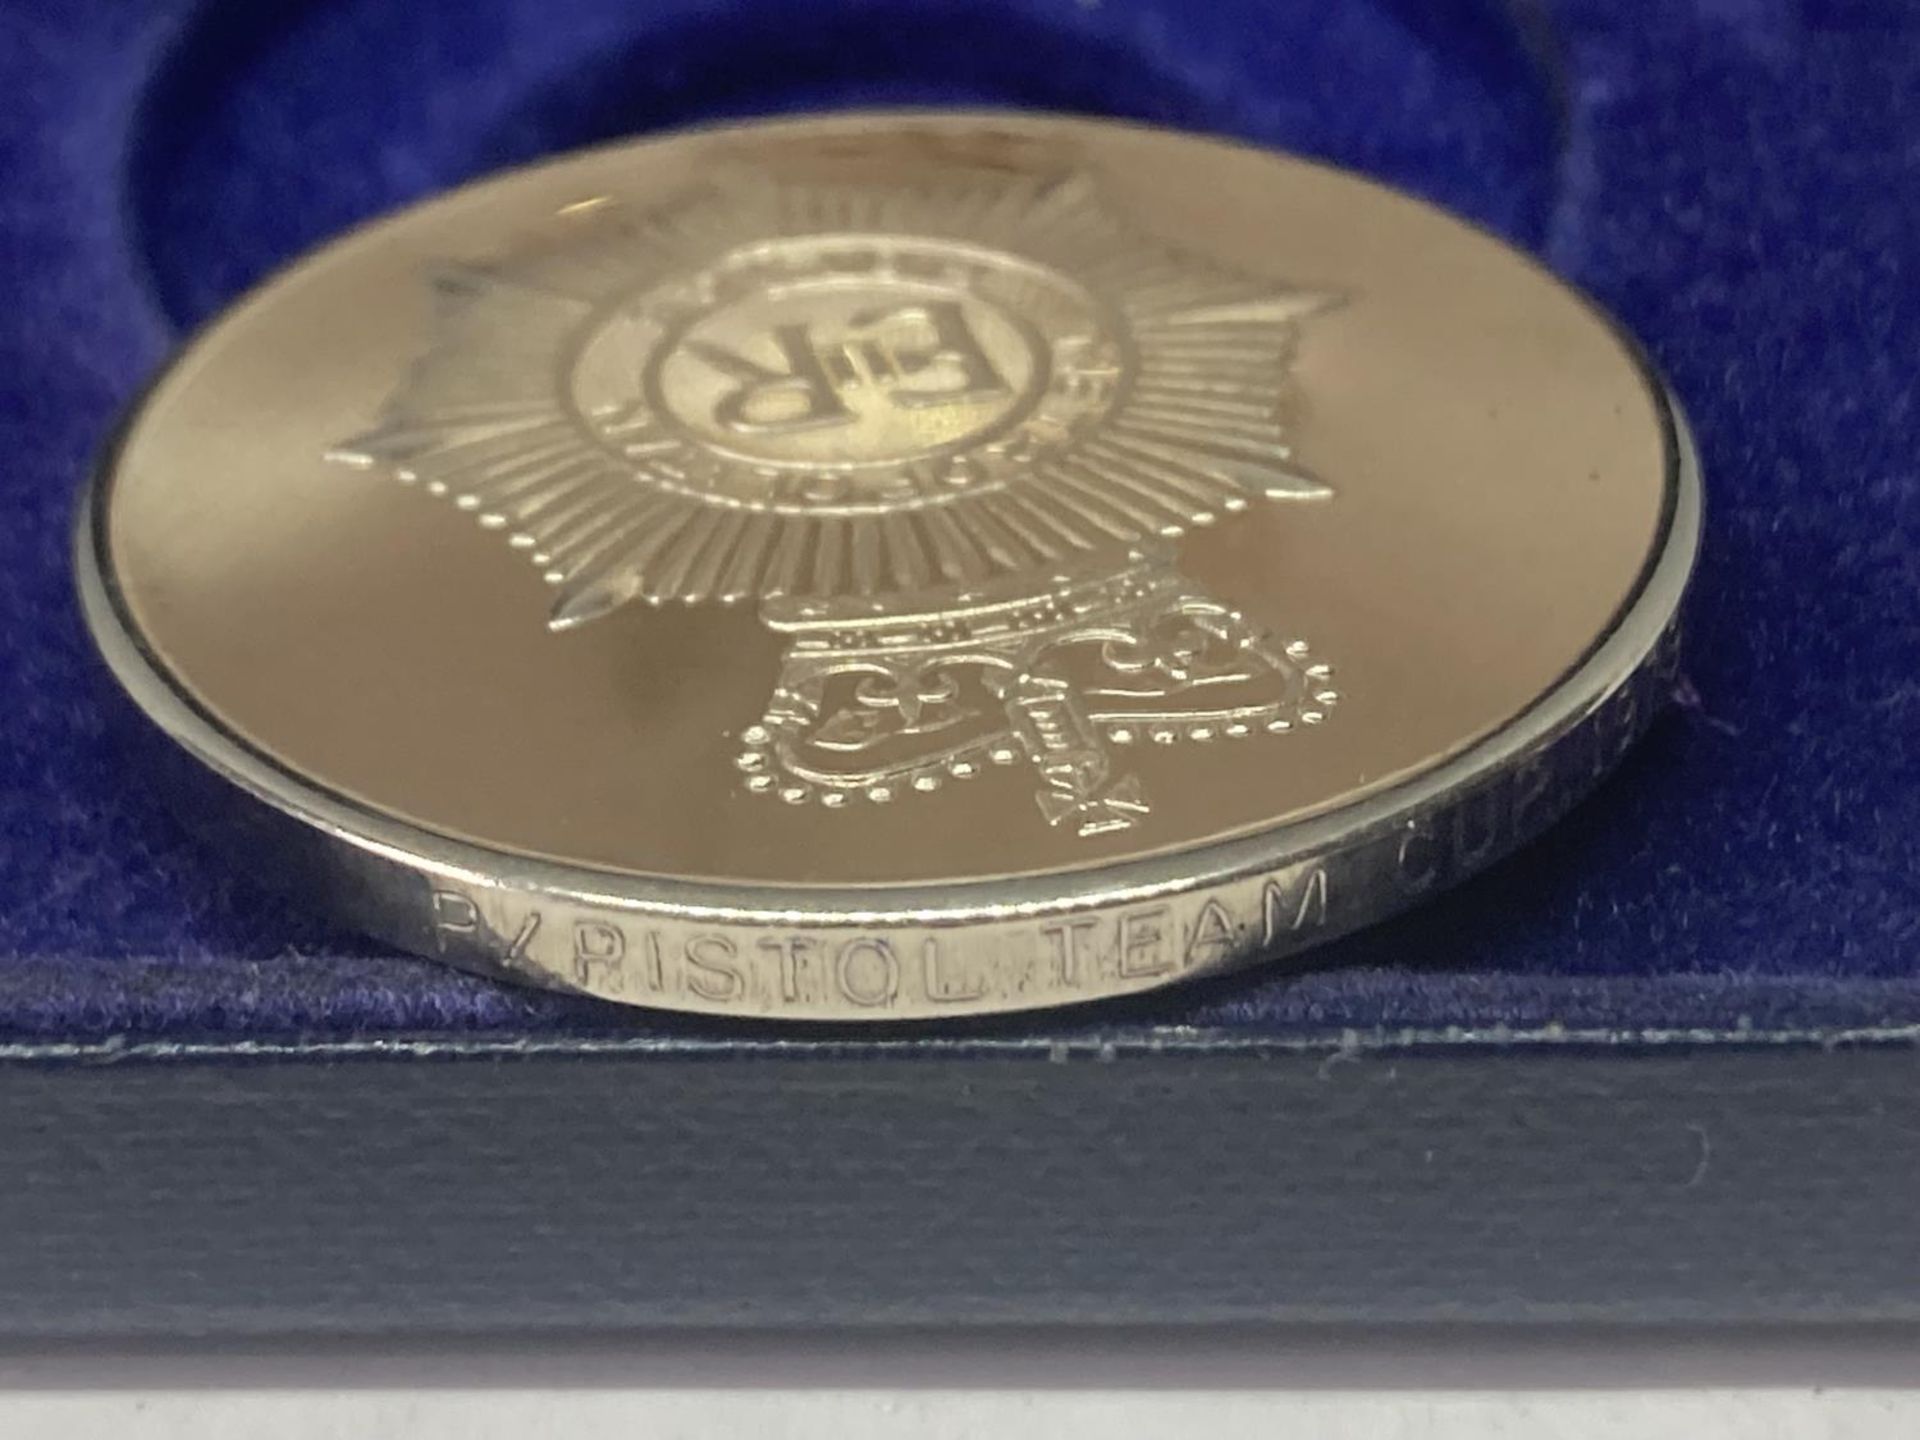 A SILVER TOWER MINT METROPOLITAN POLICE 150TH ANNIVERSARY MEDAL IN A PRESENTATION BOX - Image 7 of 8